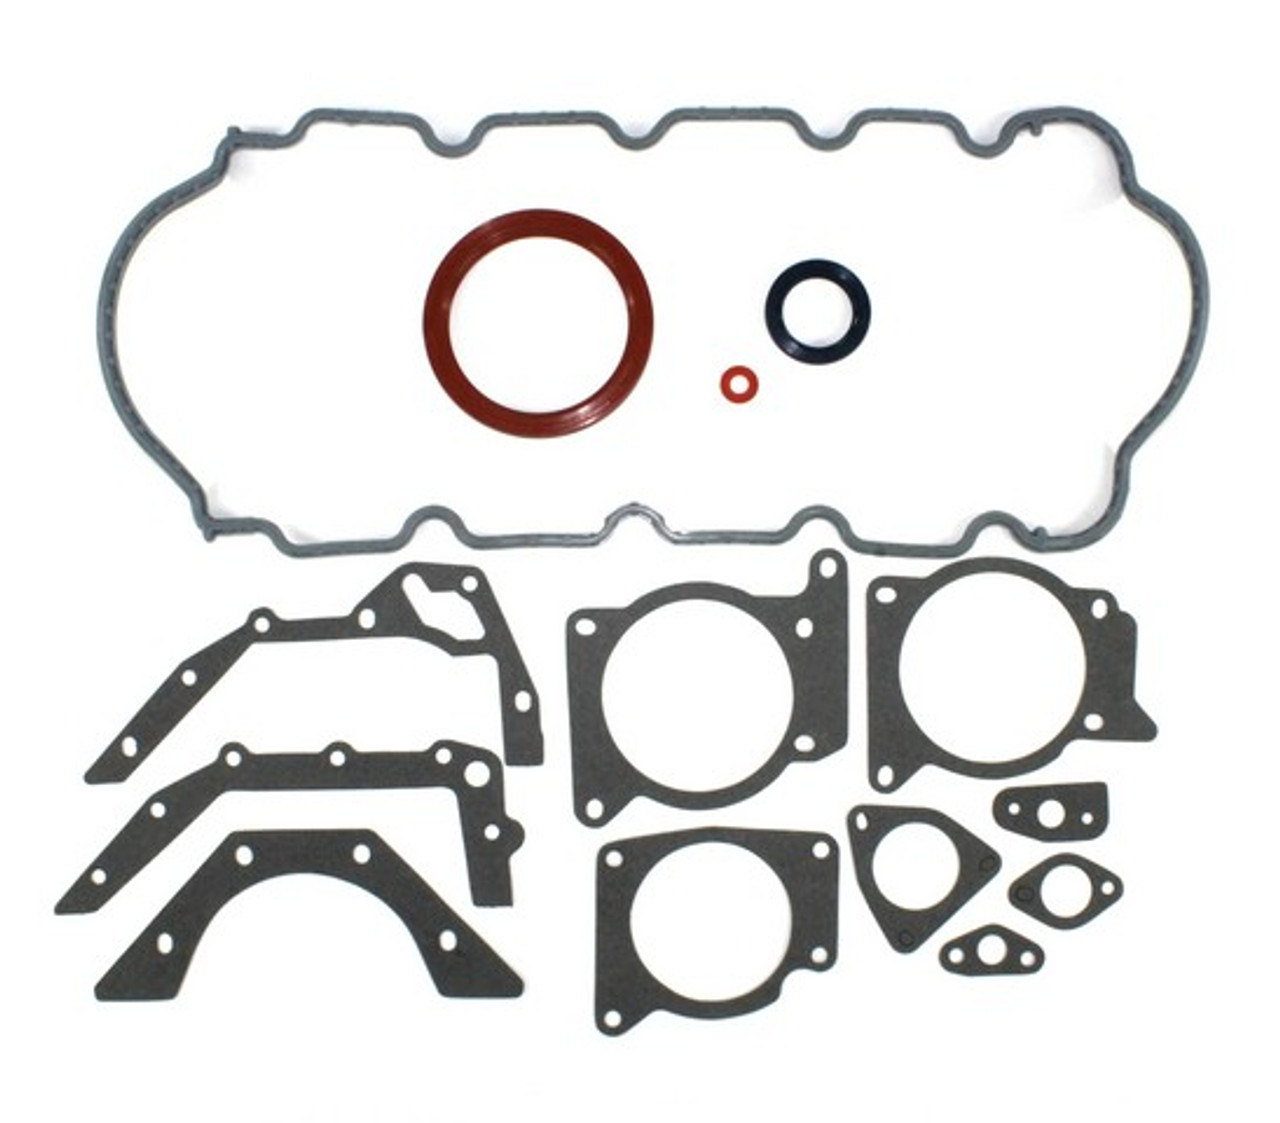 Lower Gasket Set 2.0L 2003 Ford Focus - LGS4125A.14